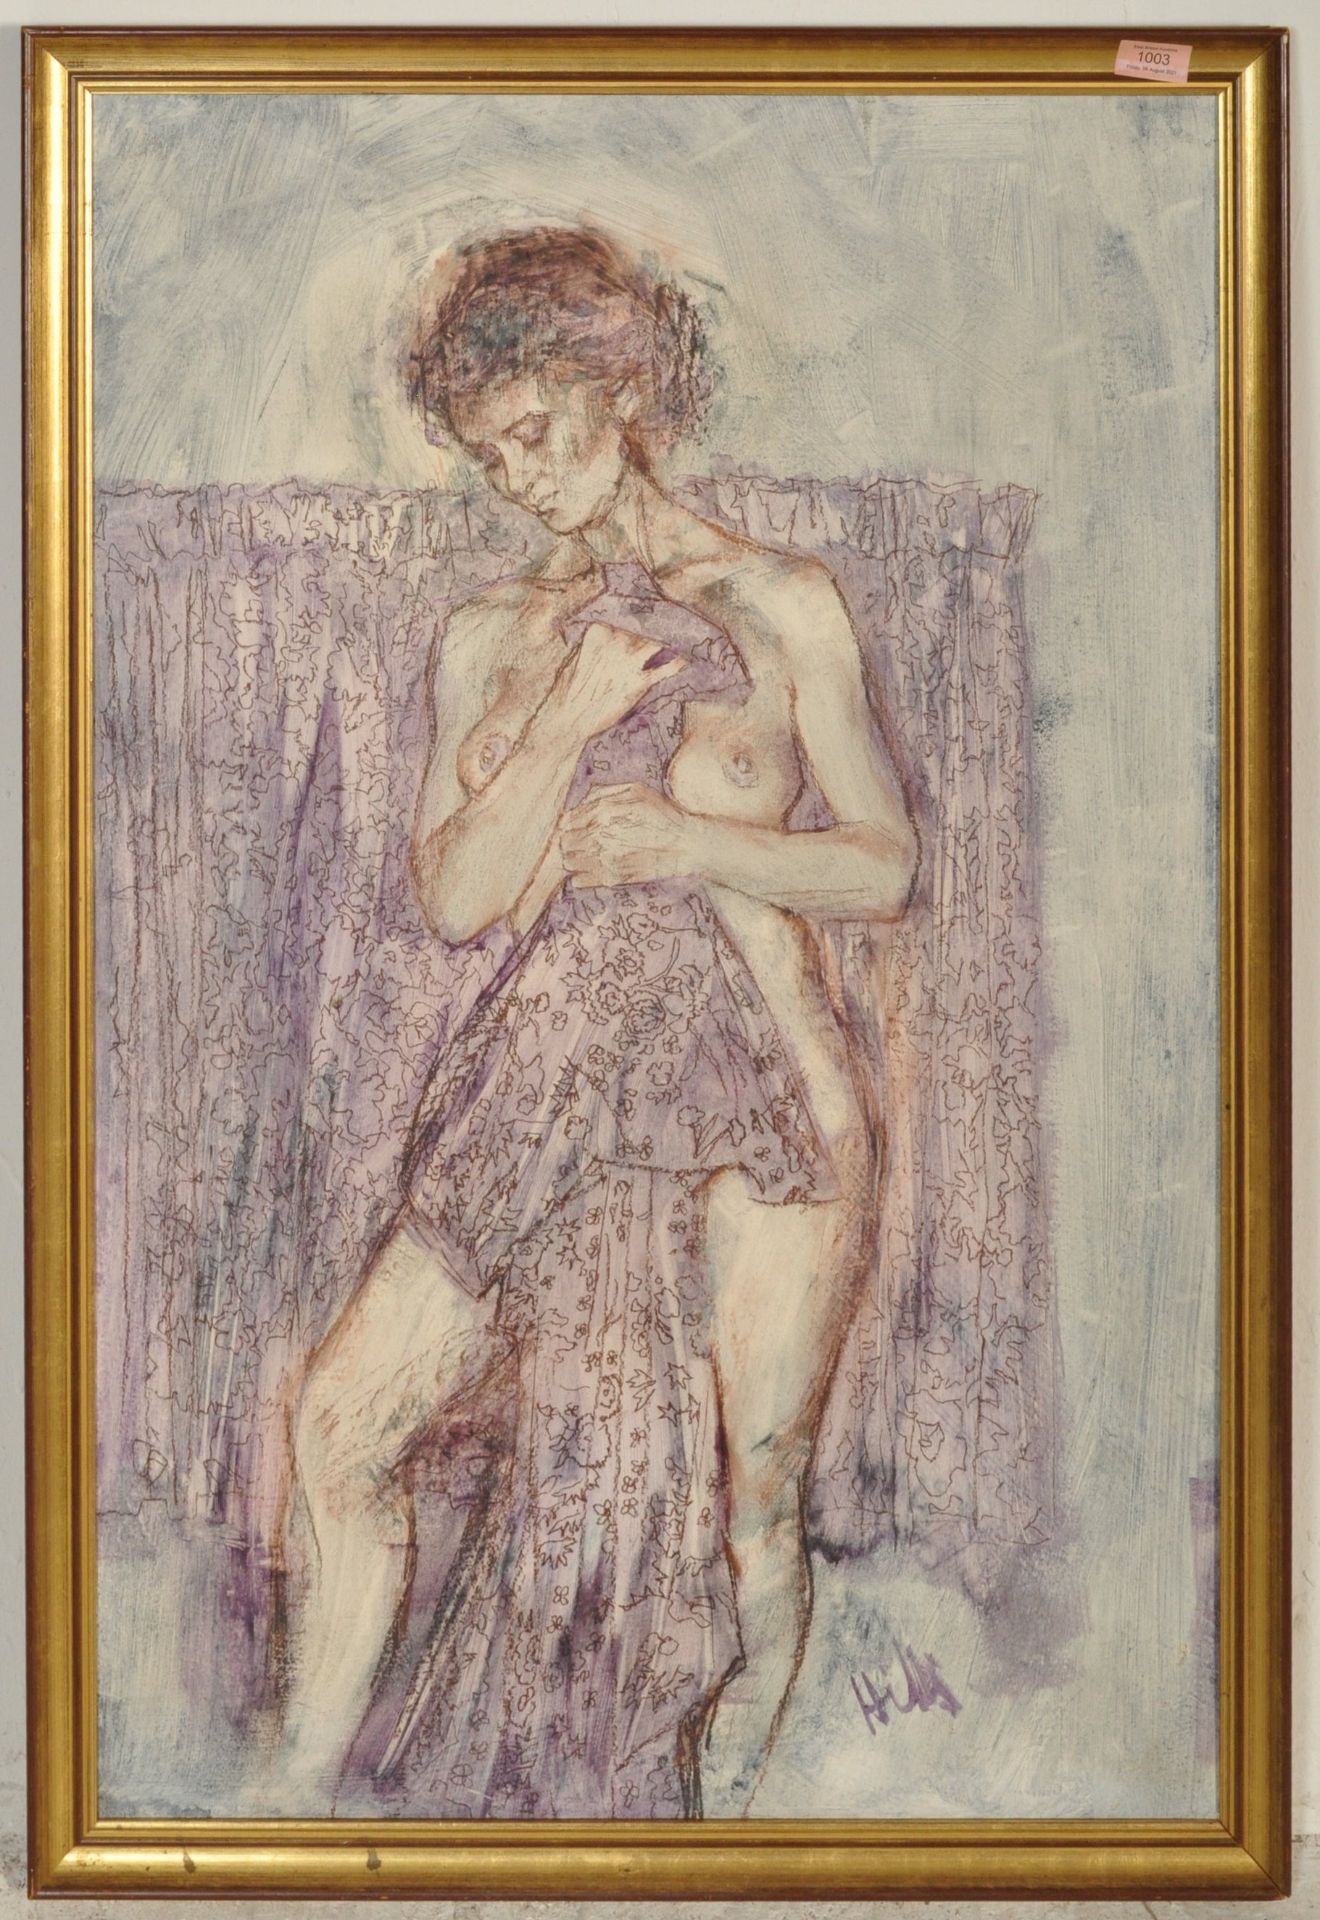 DOUGLAS HILLS (1924-1988) 'AFTER THE BATH'. MIXED MEDIA PAINTING.